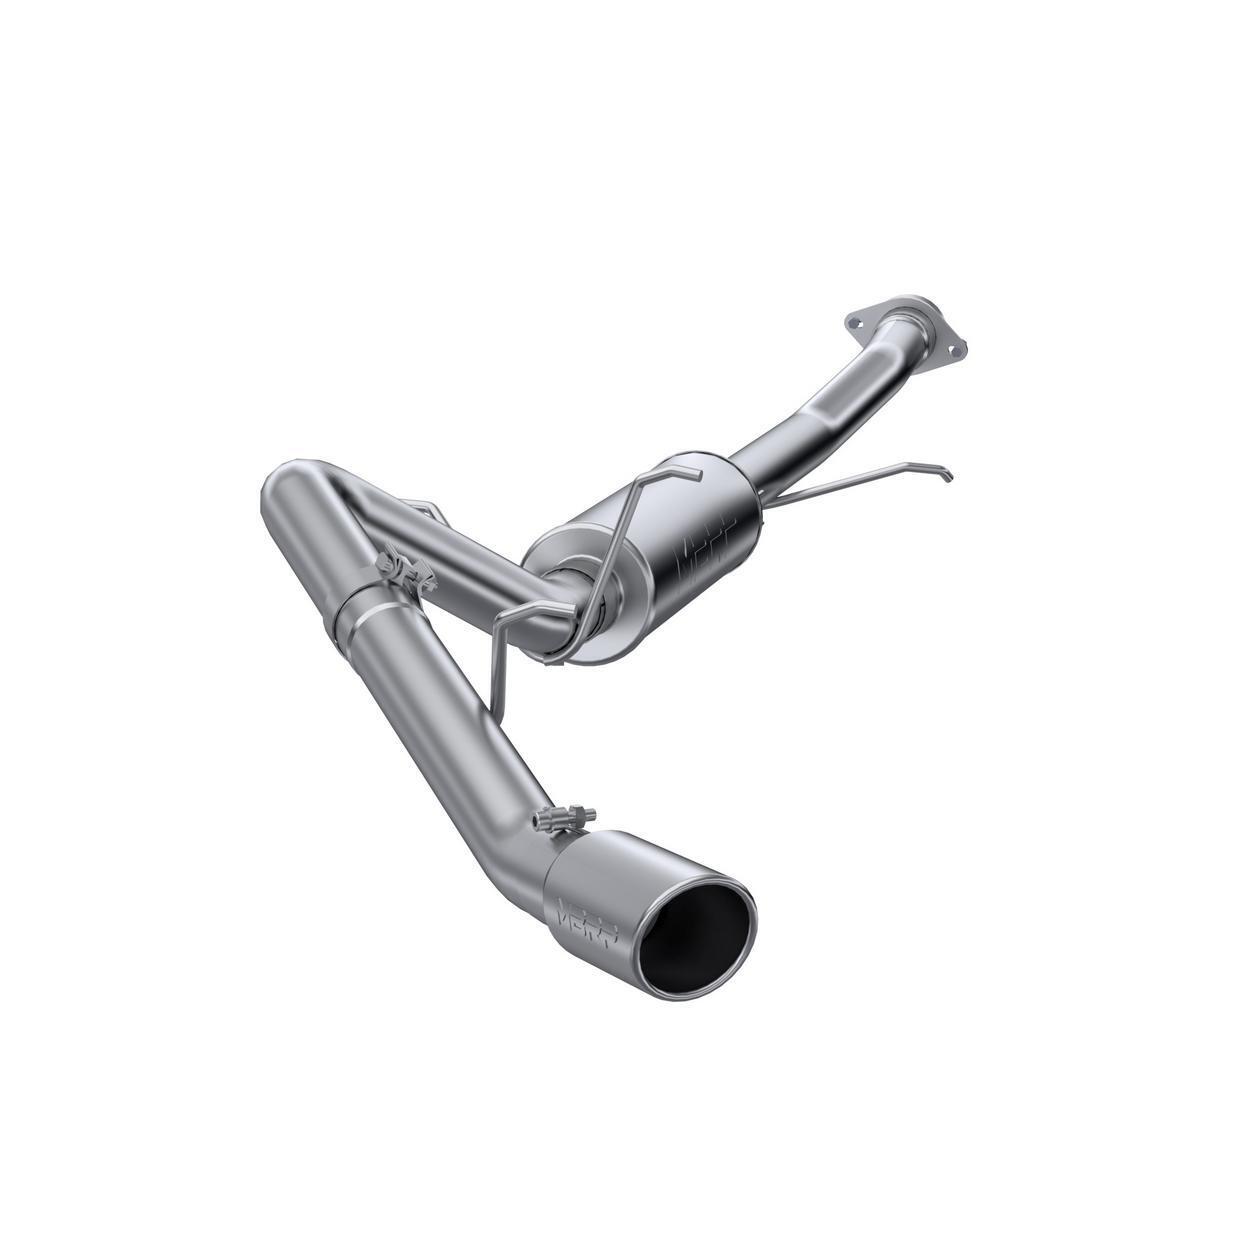 MBRP Exhaust S5034AL-AV Exhaust System Kit for 2007-2010 Cadillac Escalade EXT